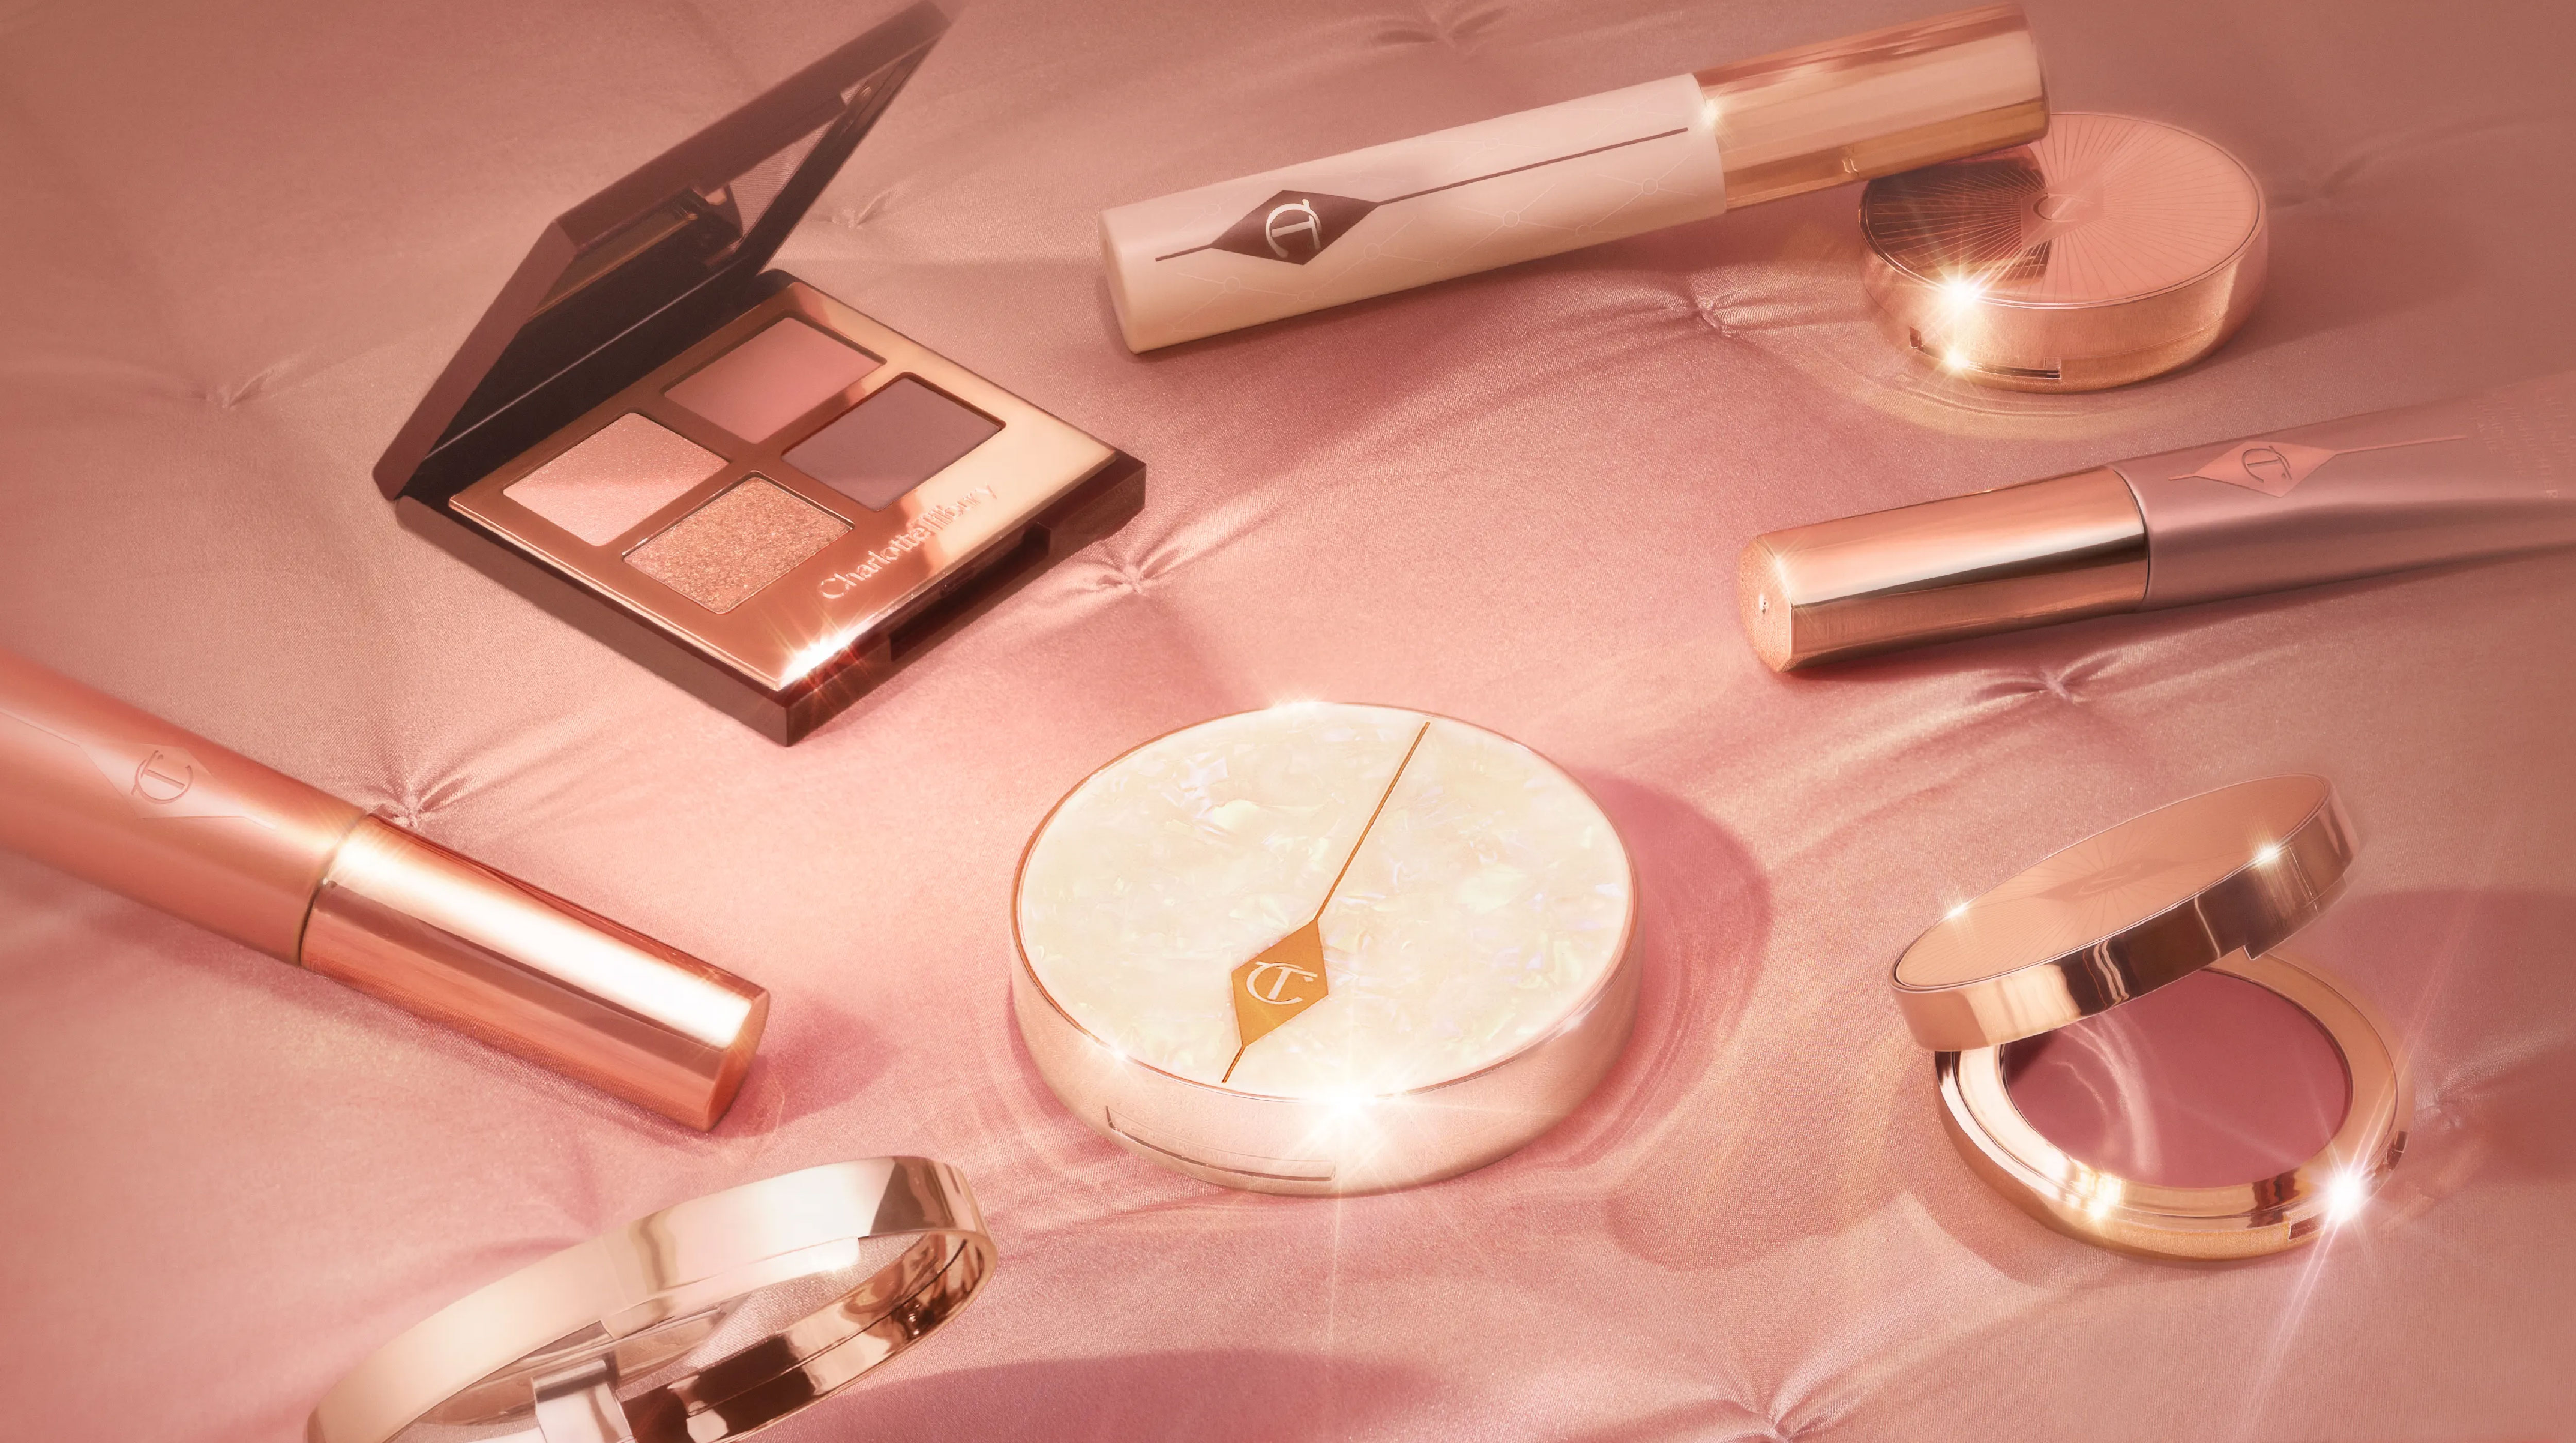 The First Charlotte Tilbury Pop-up